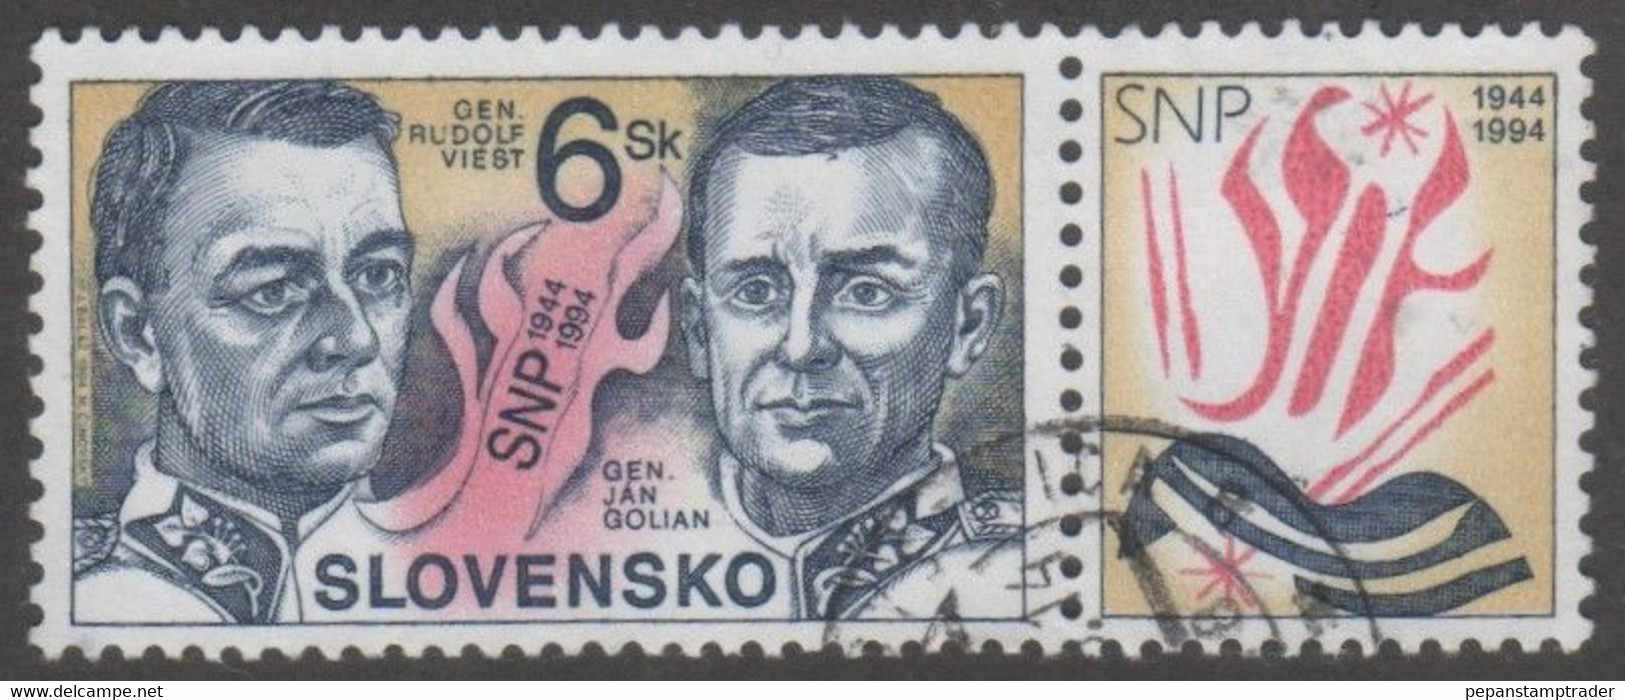 Slovakia - #189 - Used+label - Used Stamps